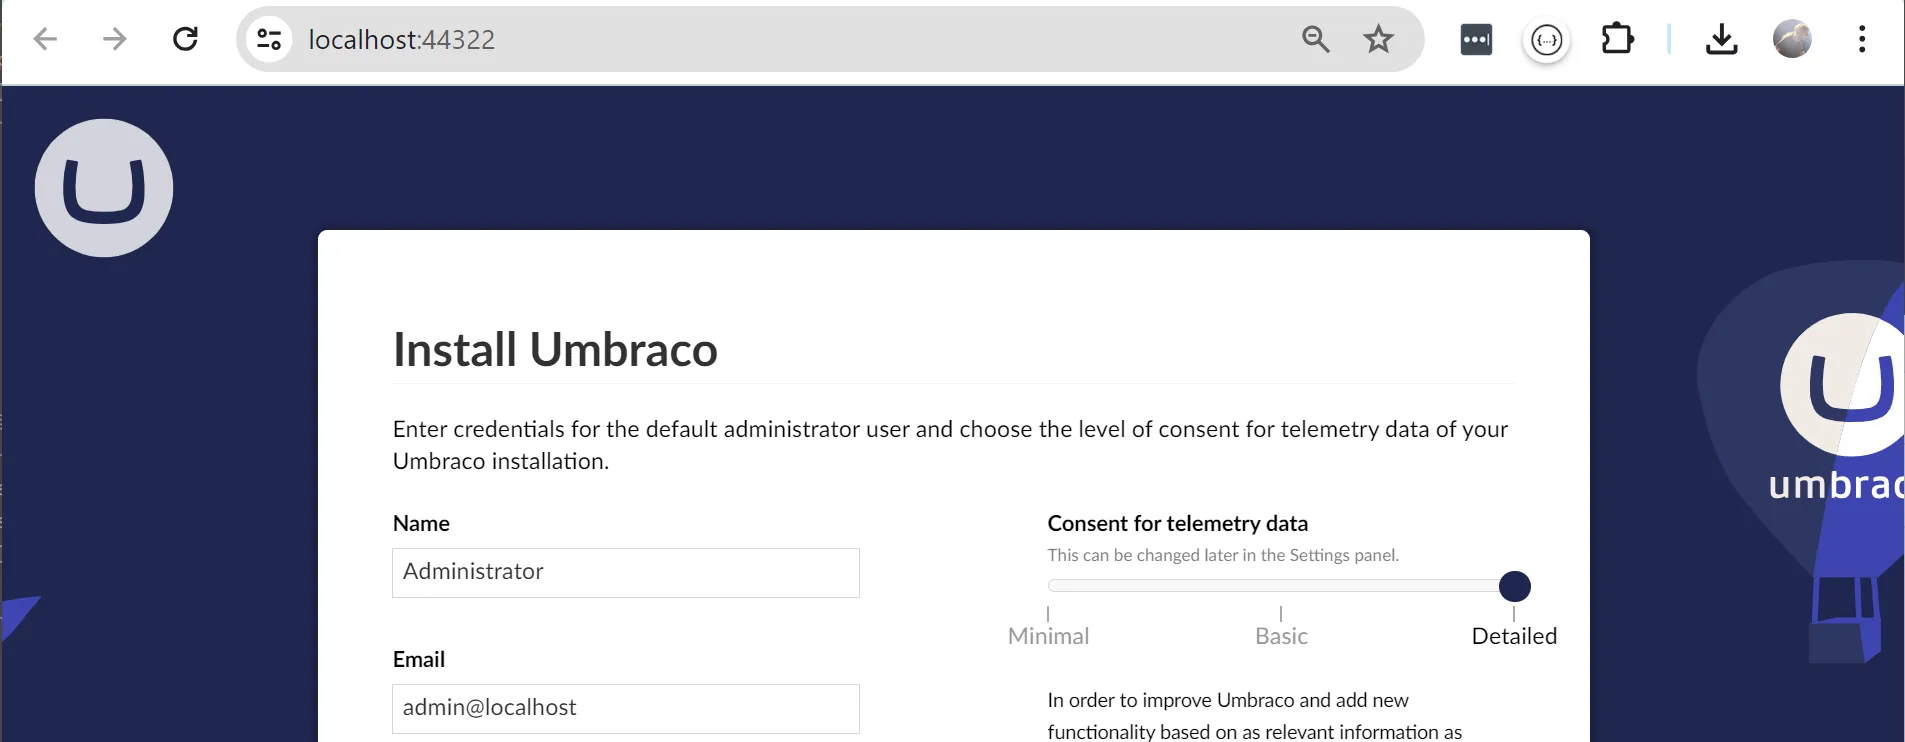 The Umbraco install wizard